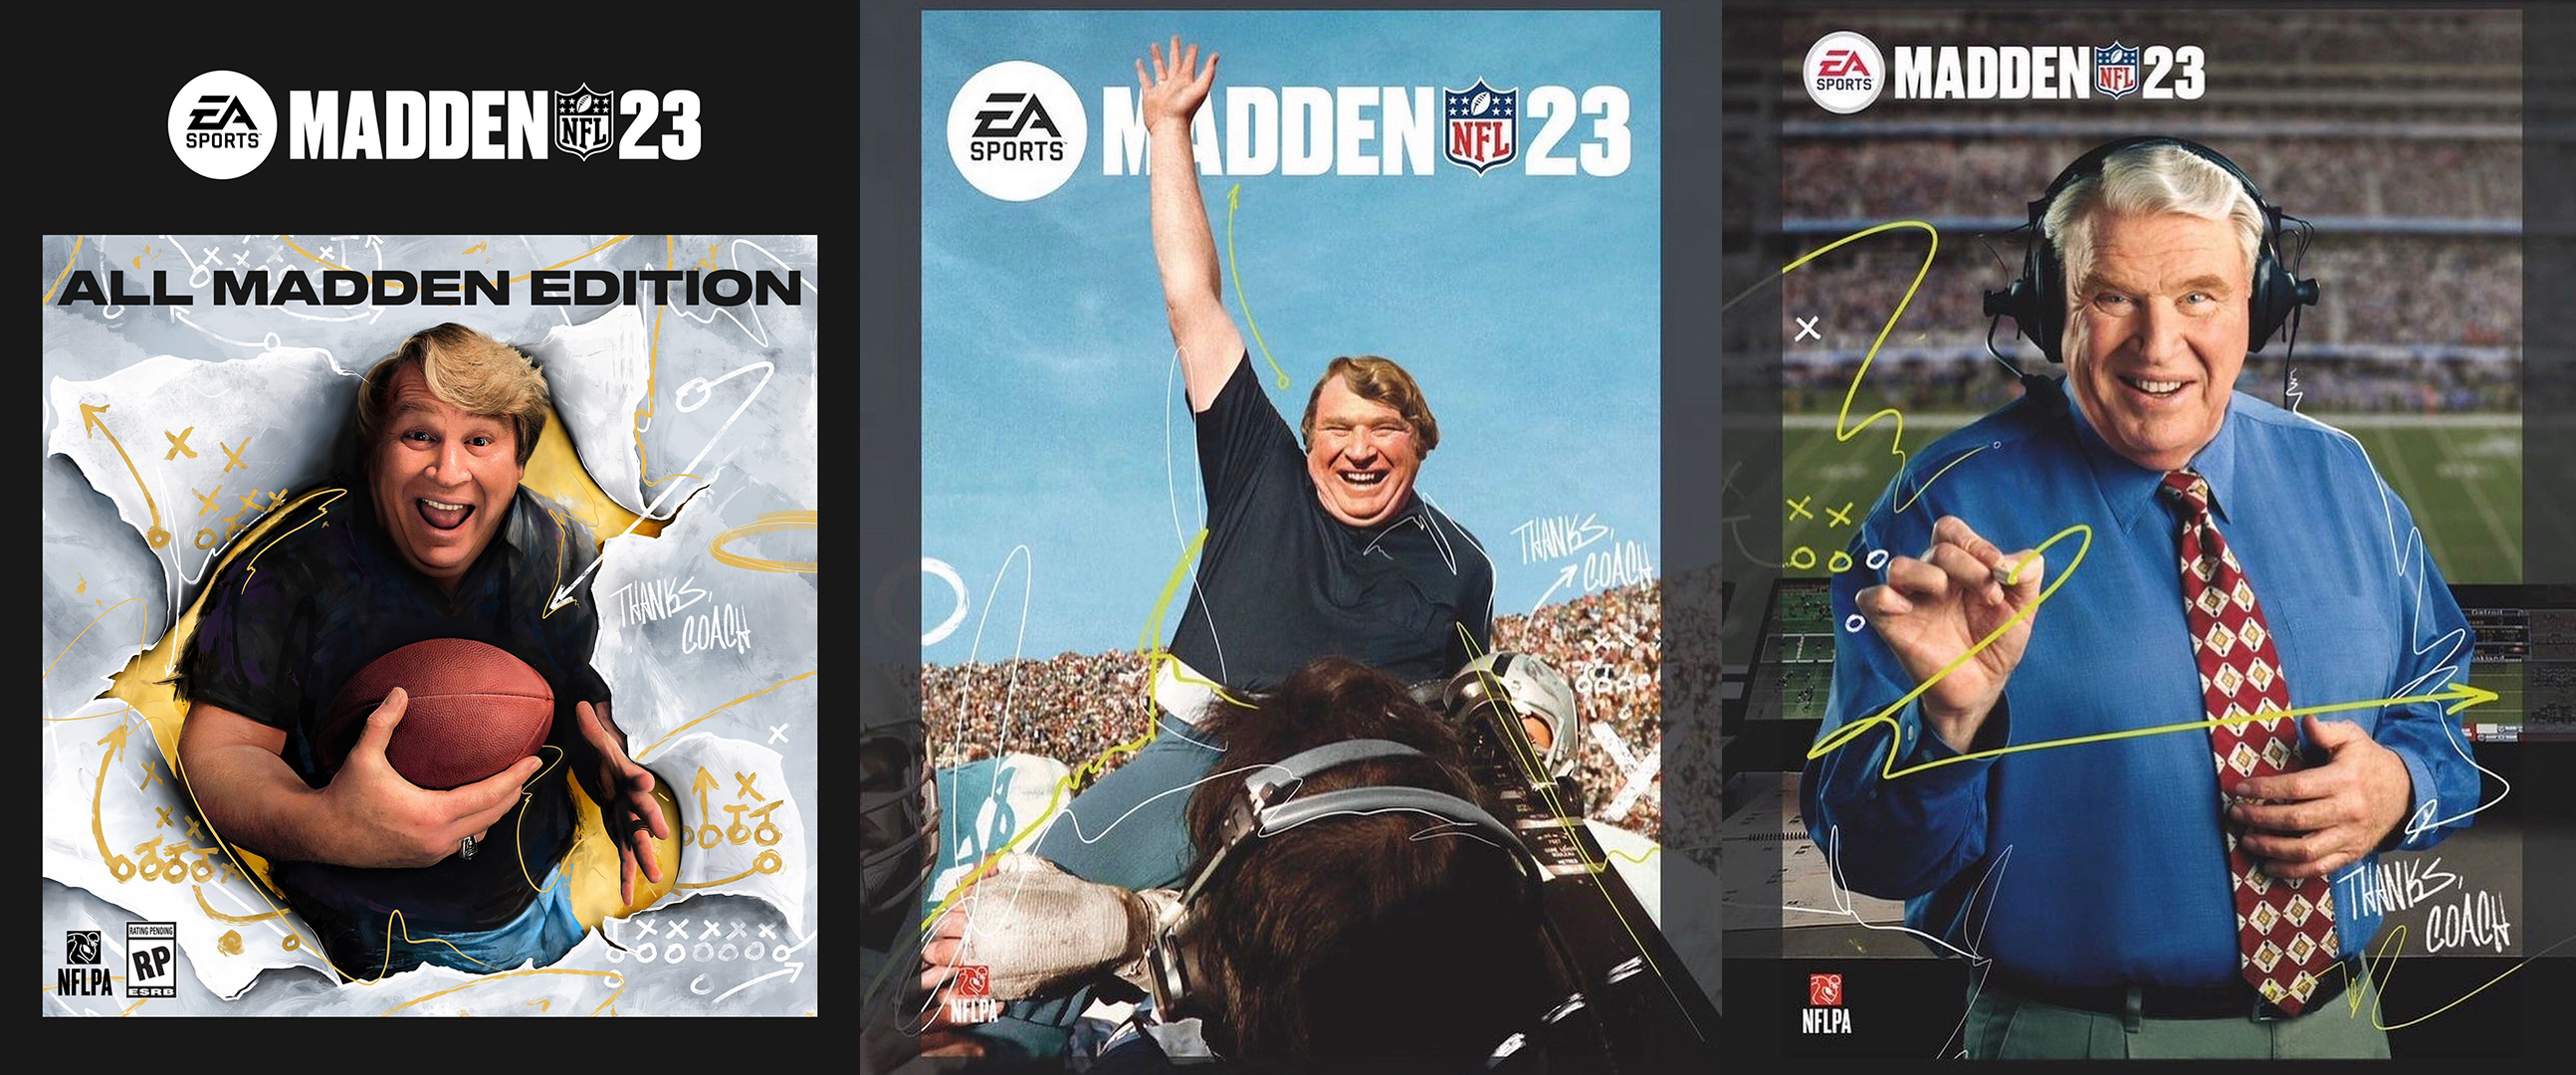 madden 23 cover